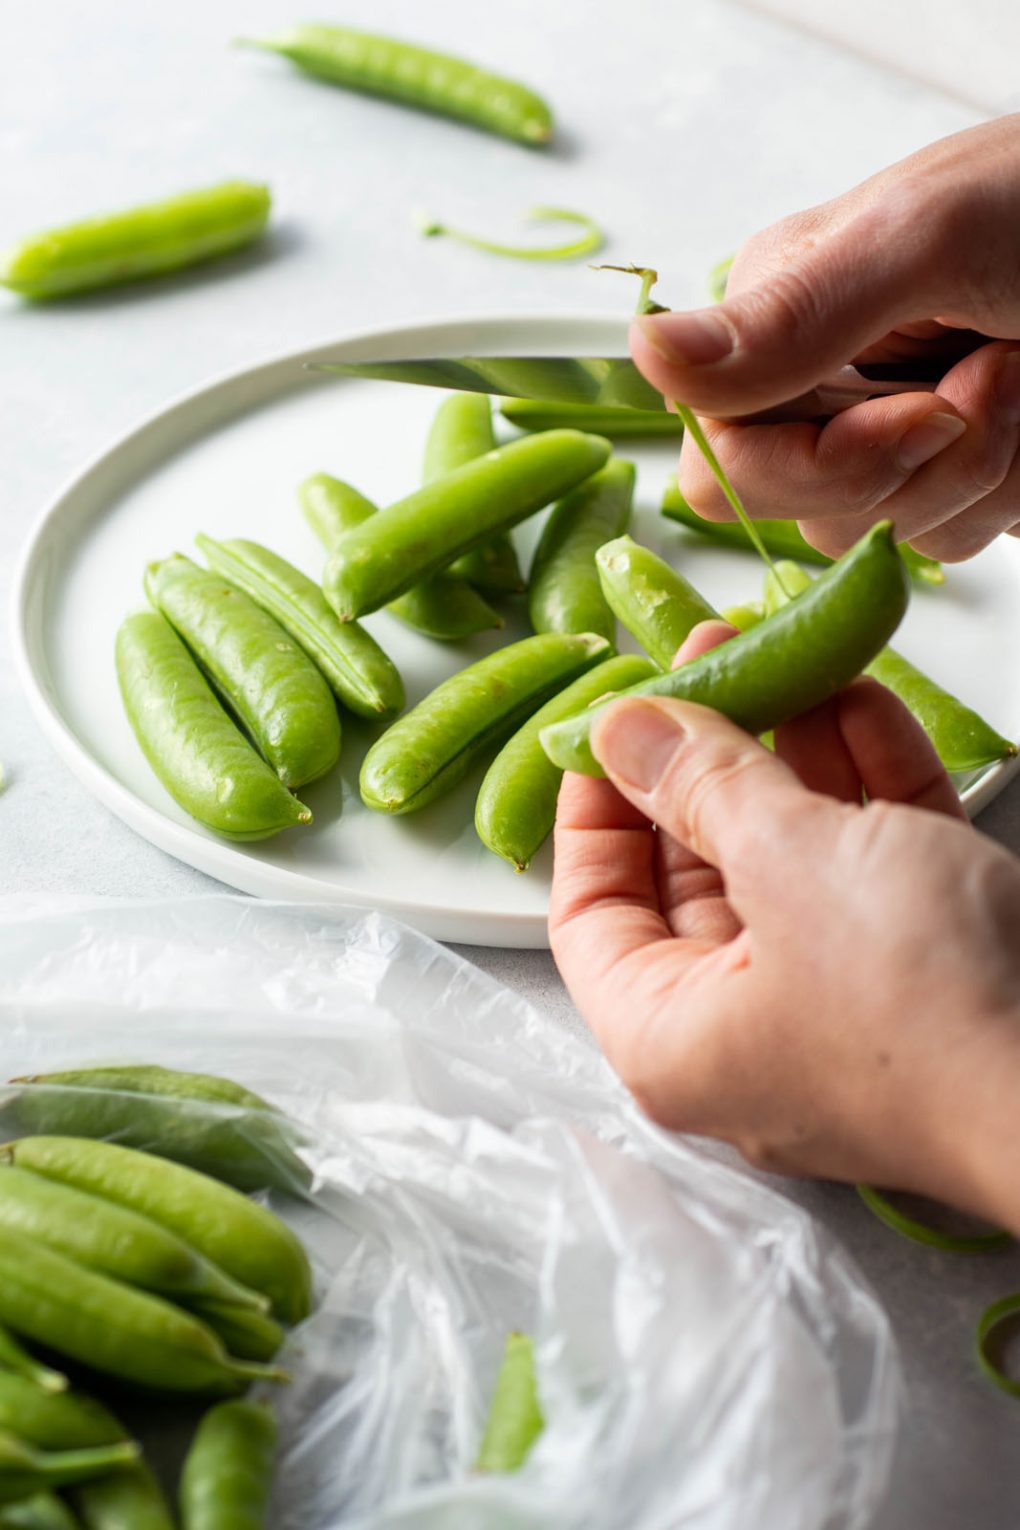 Side angle view of two hands pulling the string off of a sugar snap pea with a paring knife - on a light colored background next to a plate filled with sugar snap peas and a plastic produce bag holding the peas that have yet to be trimmed.